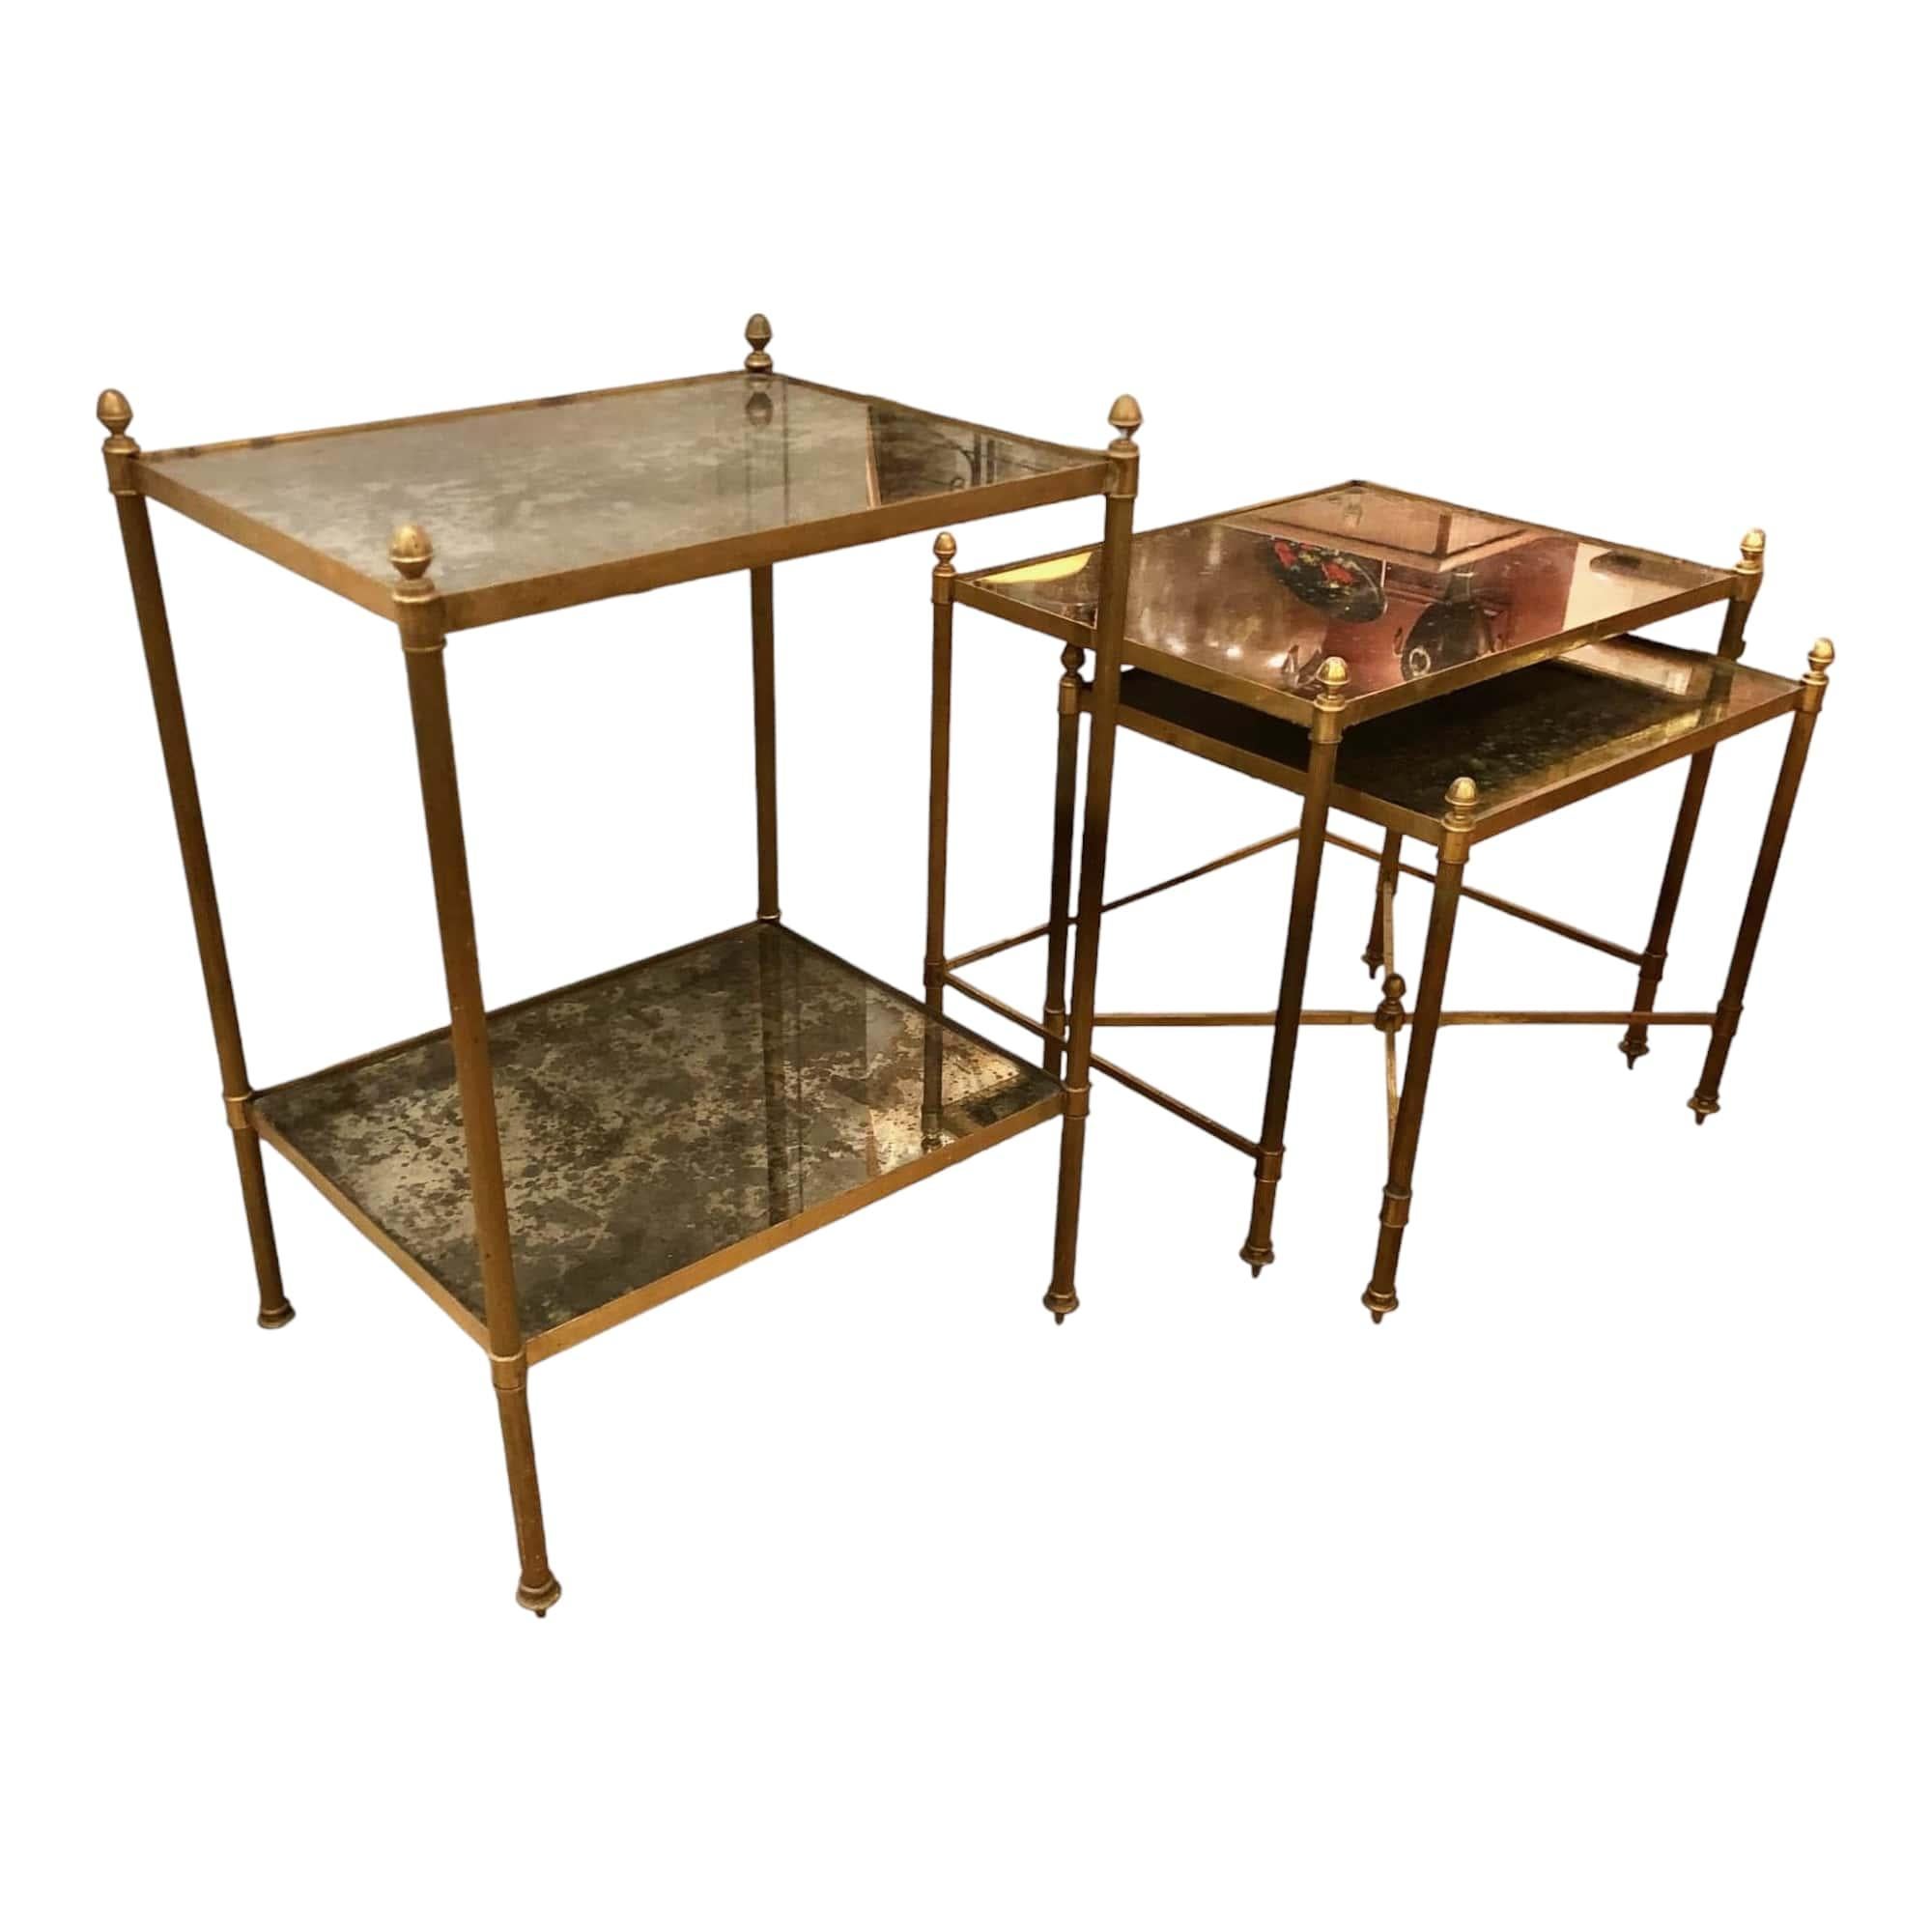 Set of nesting tables from Maison Jansen. Golden brass structure. Mirrored trays. Very good condition.

Dimensions of the small table: 30x38x37cm